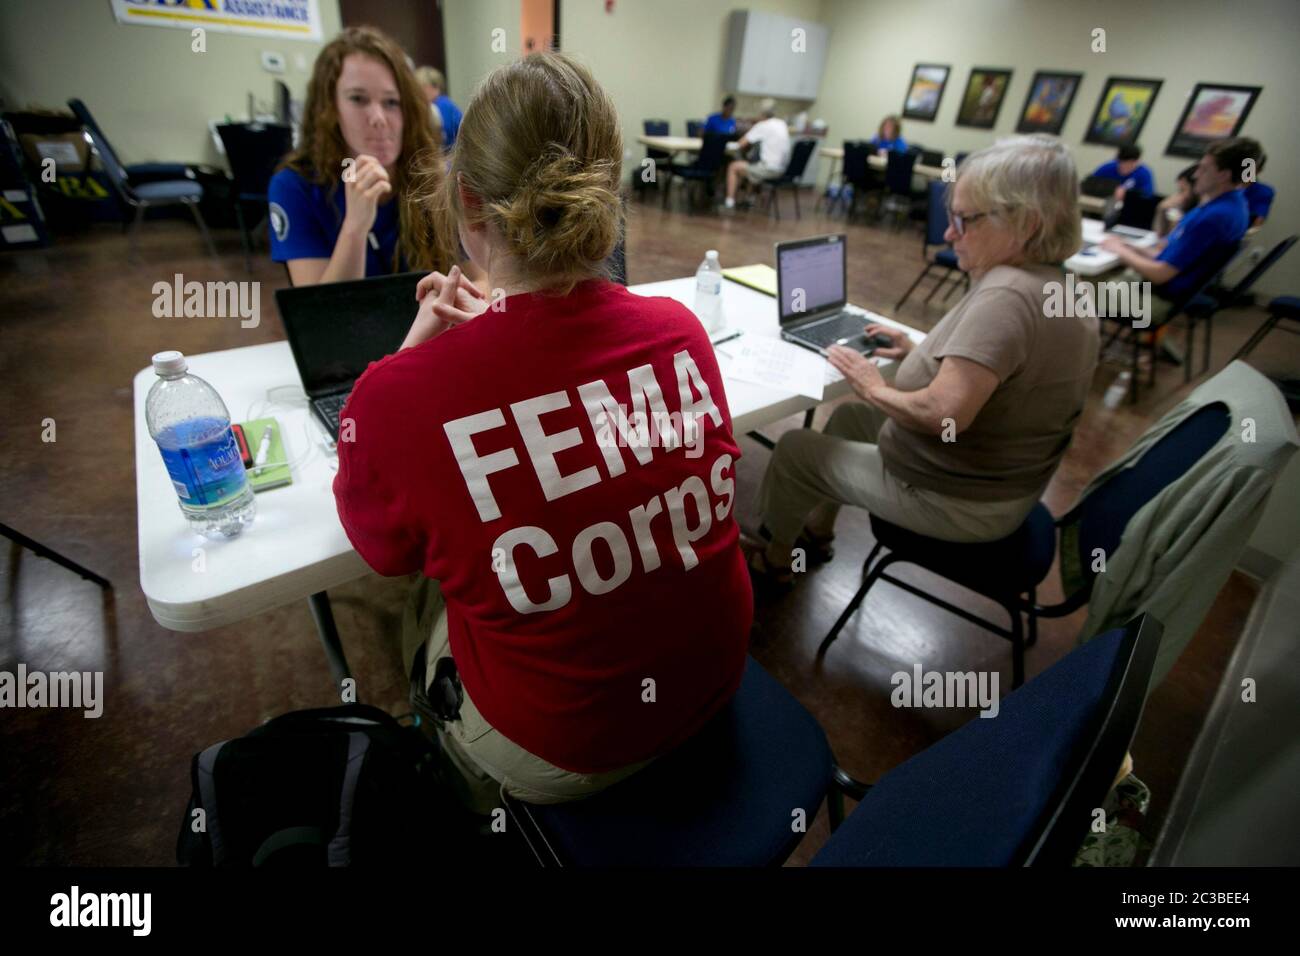 FEMA in Wimberley, Texas - Wimberley, Texas USA June 6th, 2015: The Federal Emergency Management Agency set up a mobile intake center (MRIC) to serve local residents who want to register for federal aid after devastating floods hit the area over the Memorial Day weekend.   ©Marjorie Kamys Cotera/Daemmrich Photography Stock Photo